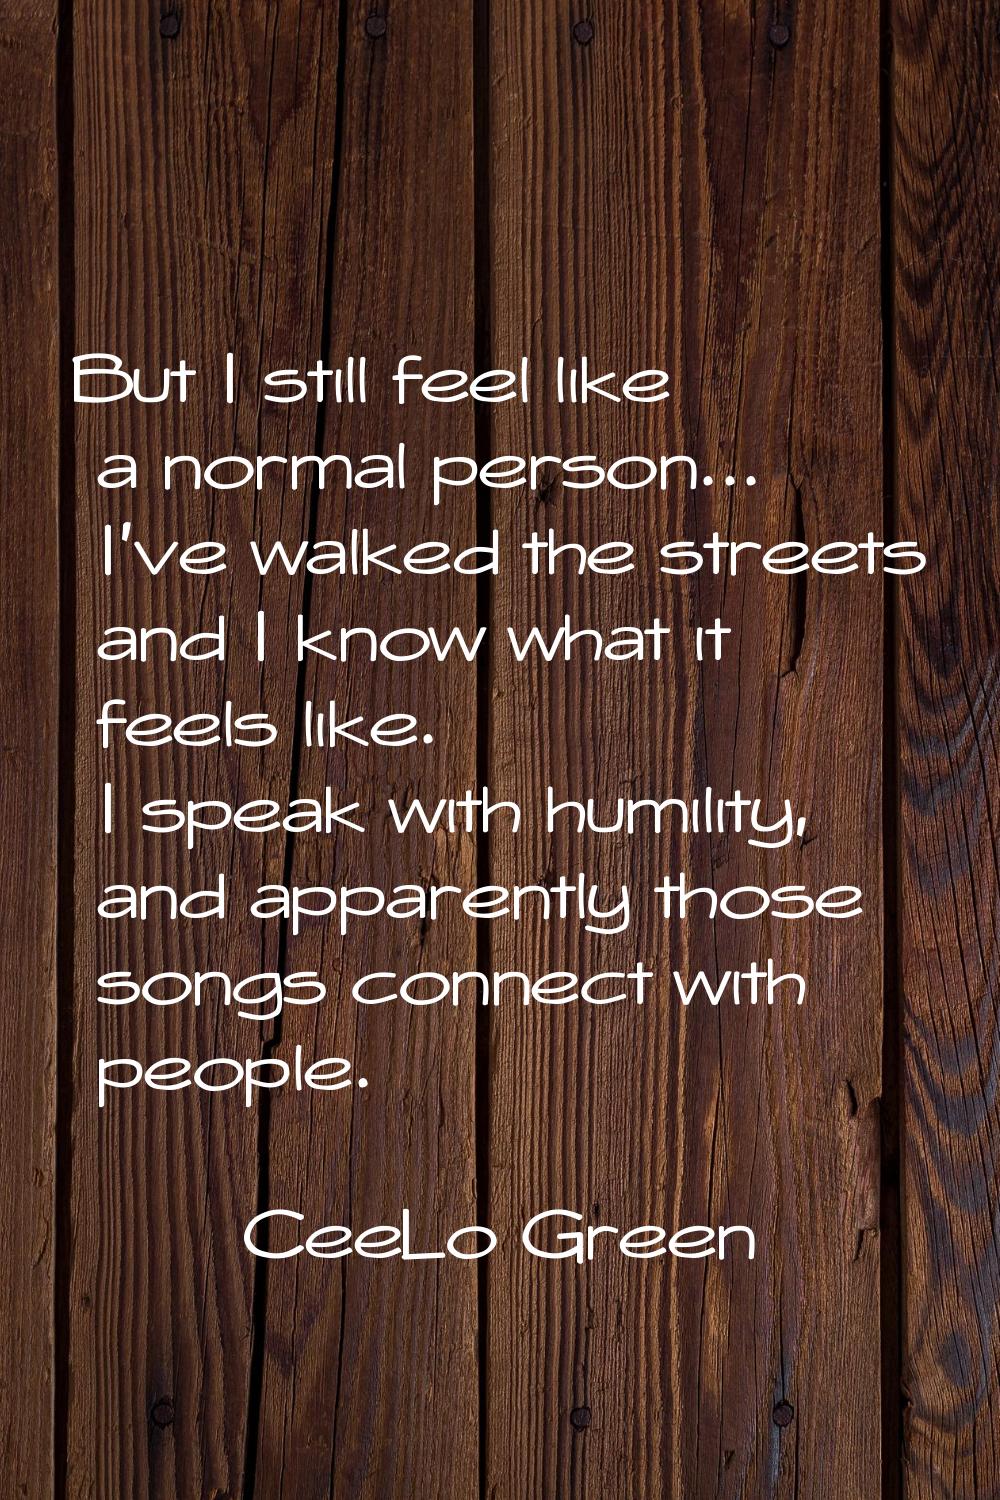 But I still feel like a normal person... I've walked the streets and I know what it feels like. I s